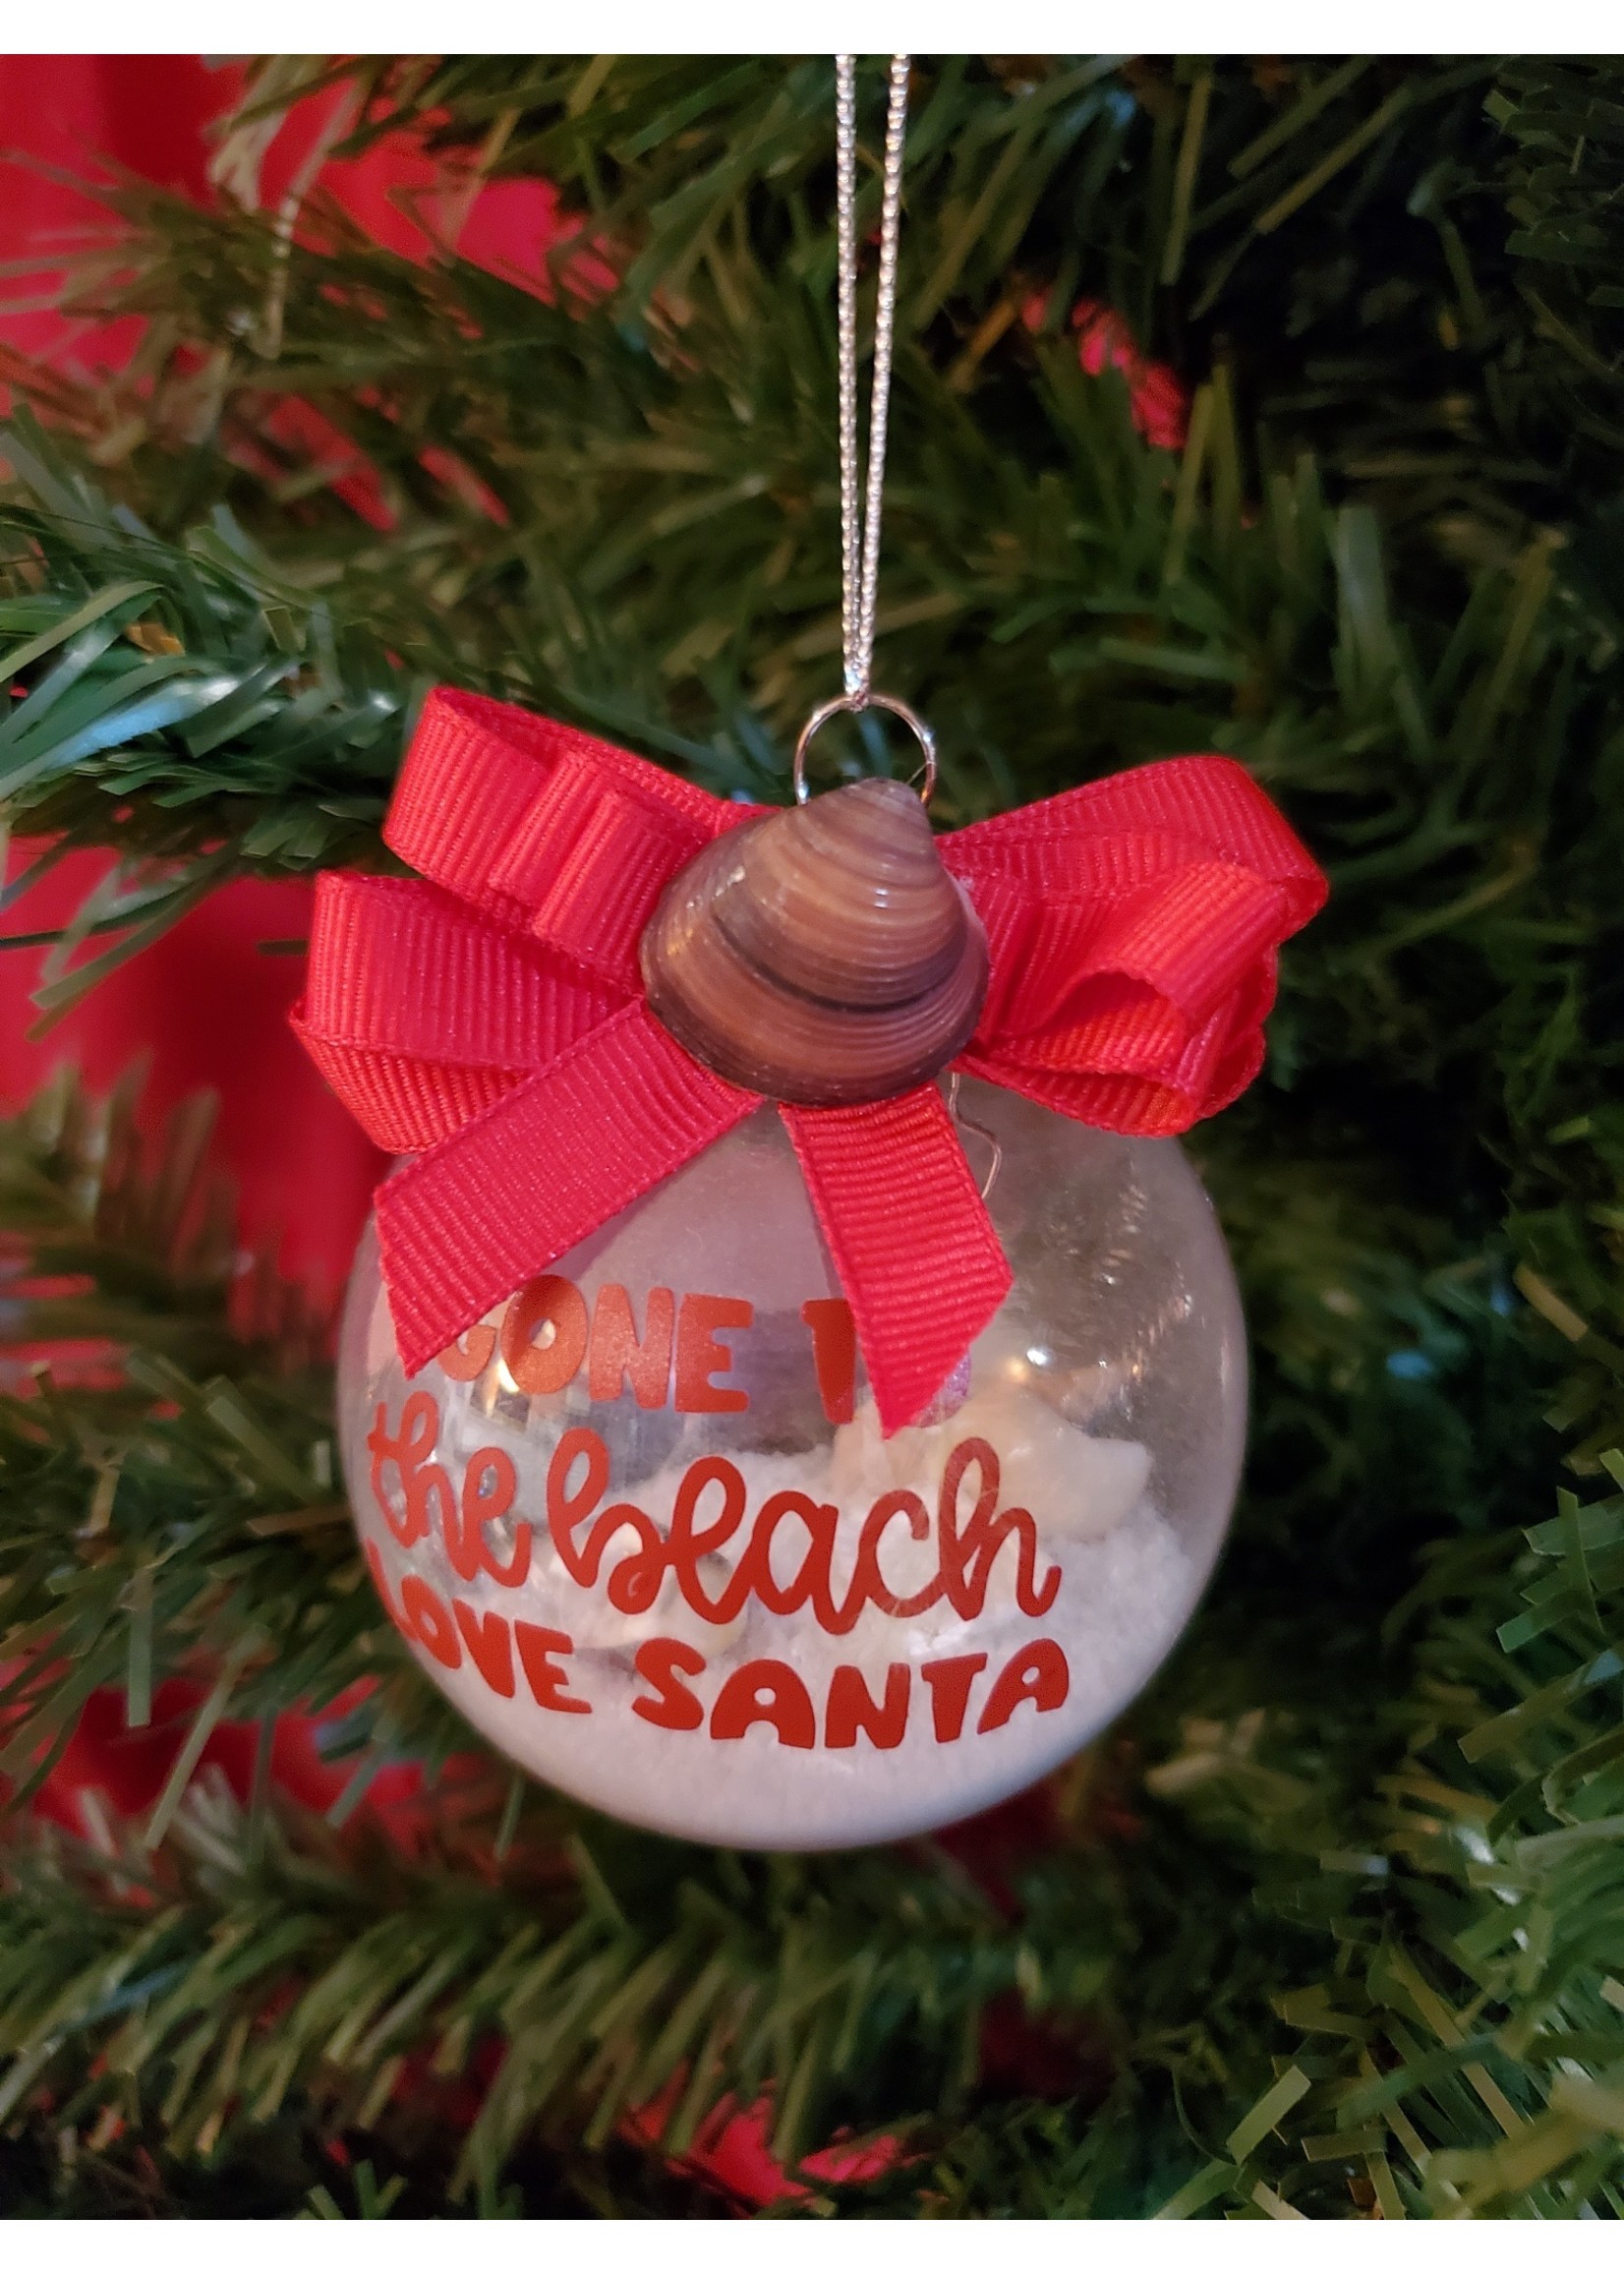 Sally Ward Ornament clear plastic 2.65 in-Red Gone to Beach w/Sand, Shells  and Red Ribbon